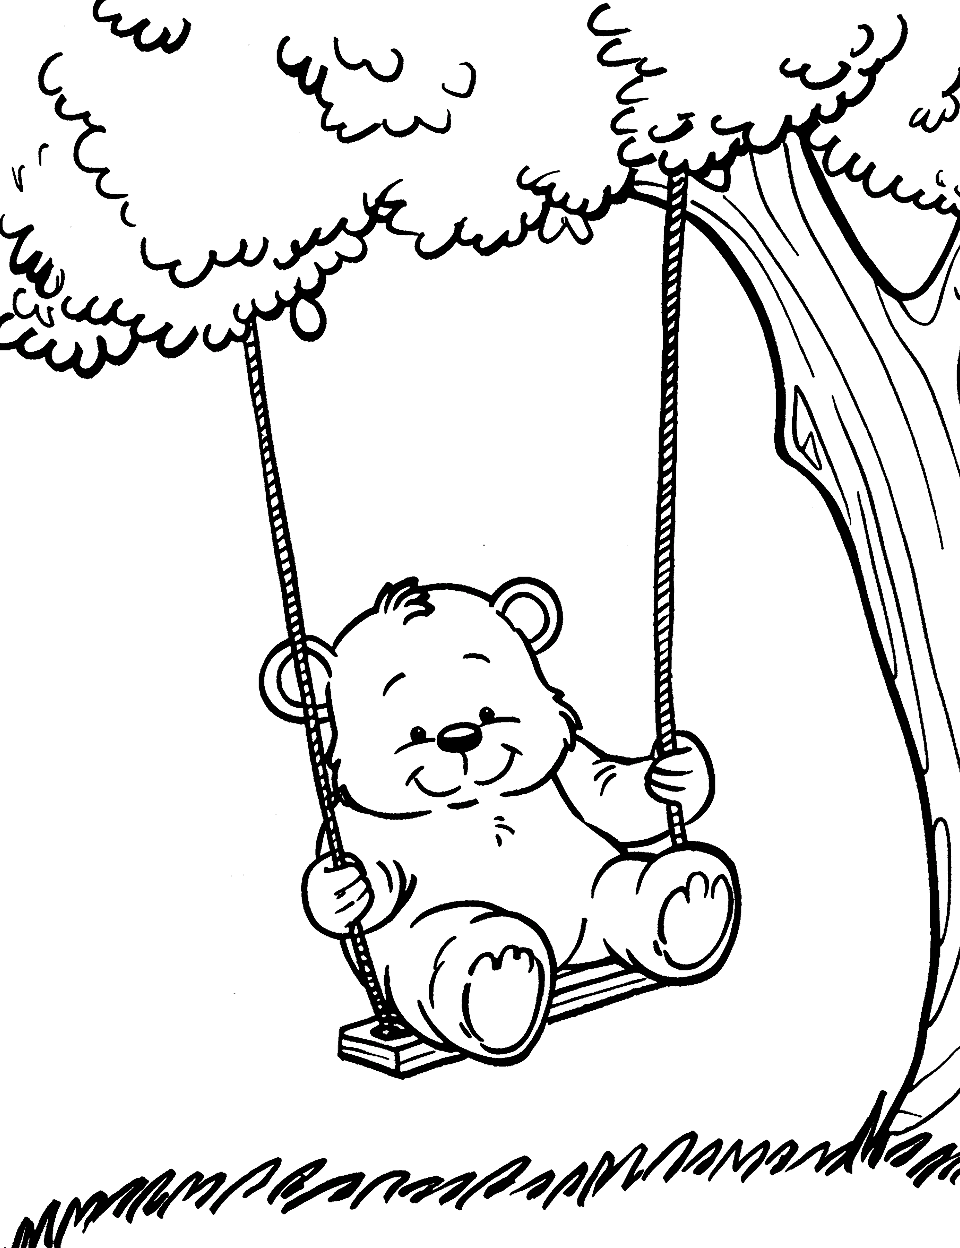 Fun Teddy Bear on a Swing Coloring Page - A teddy bear happily swinging under a tree.